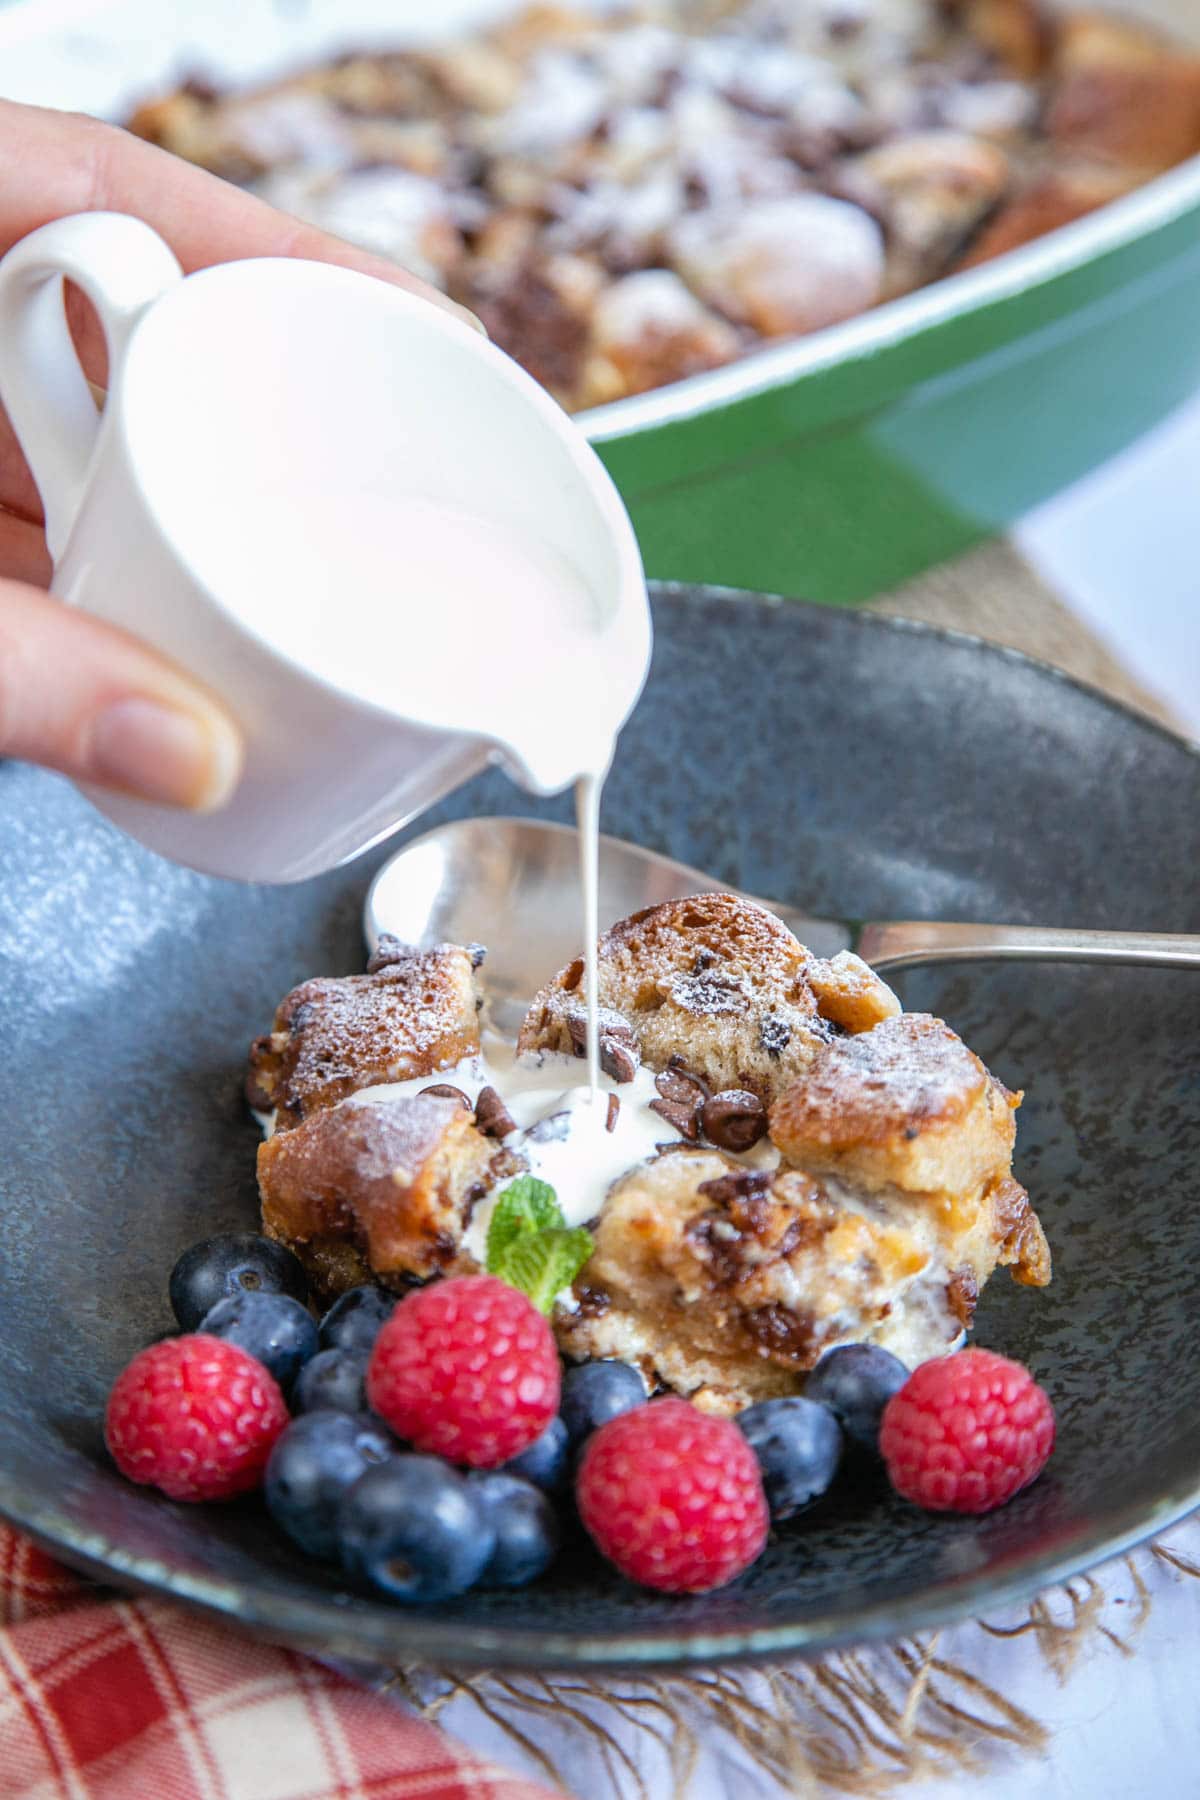 Hot cross bun bread and butter pudding, served with fresh berries and a drizzle of cream.